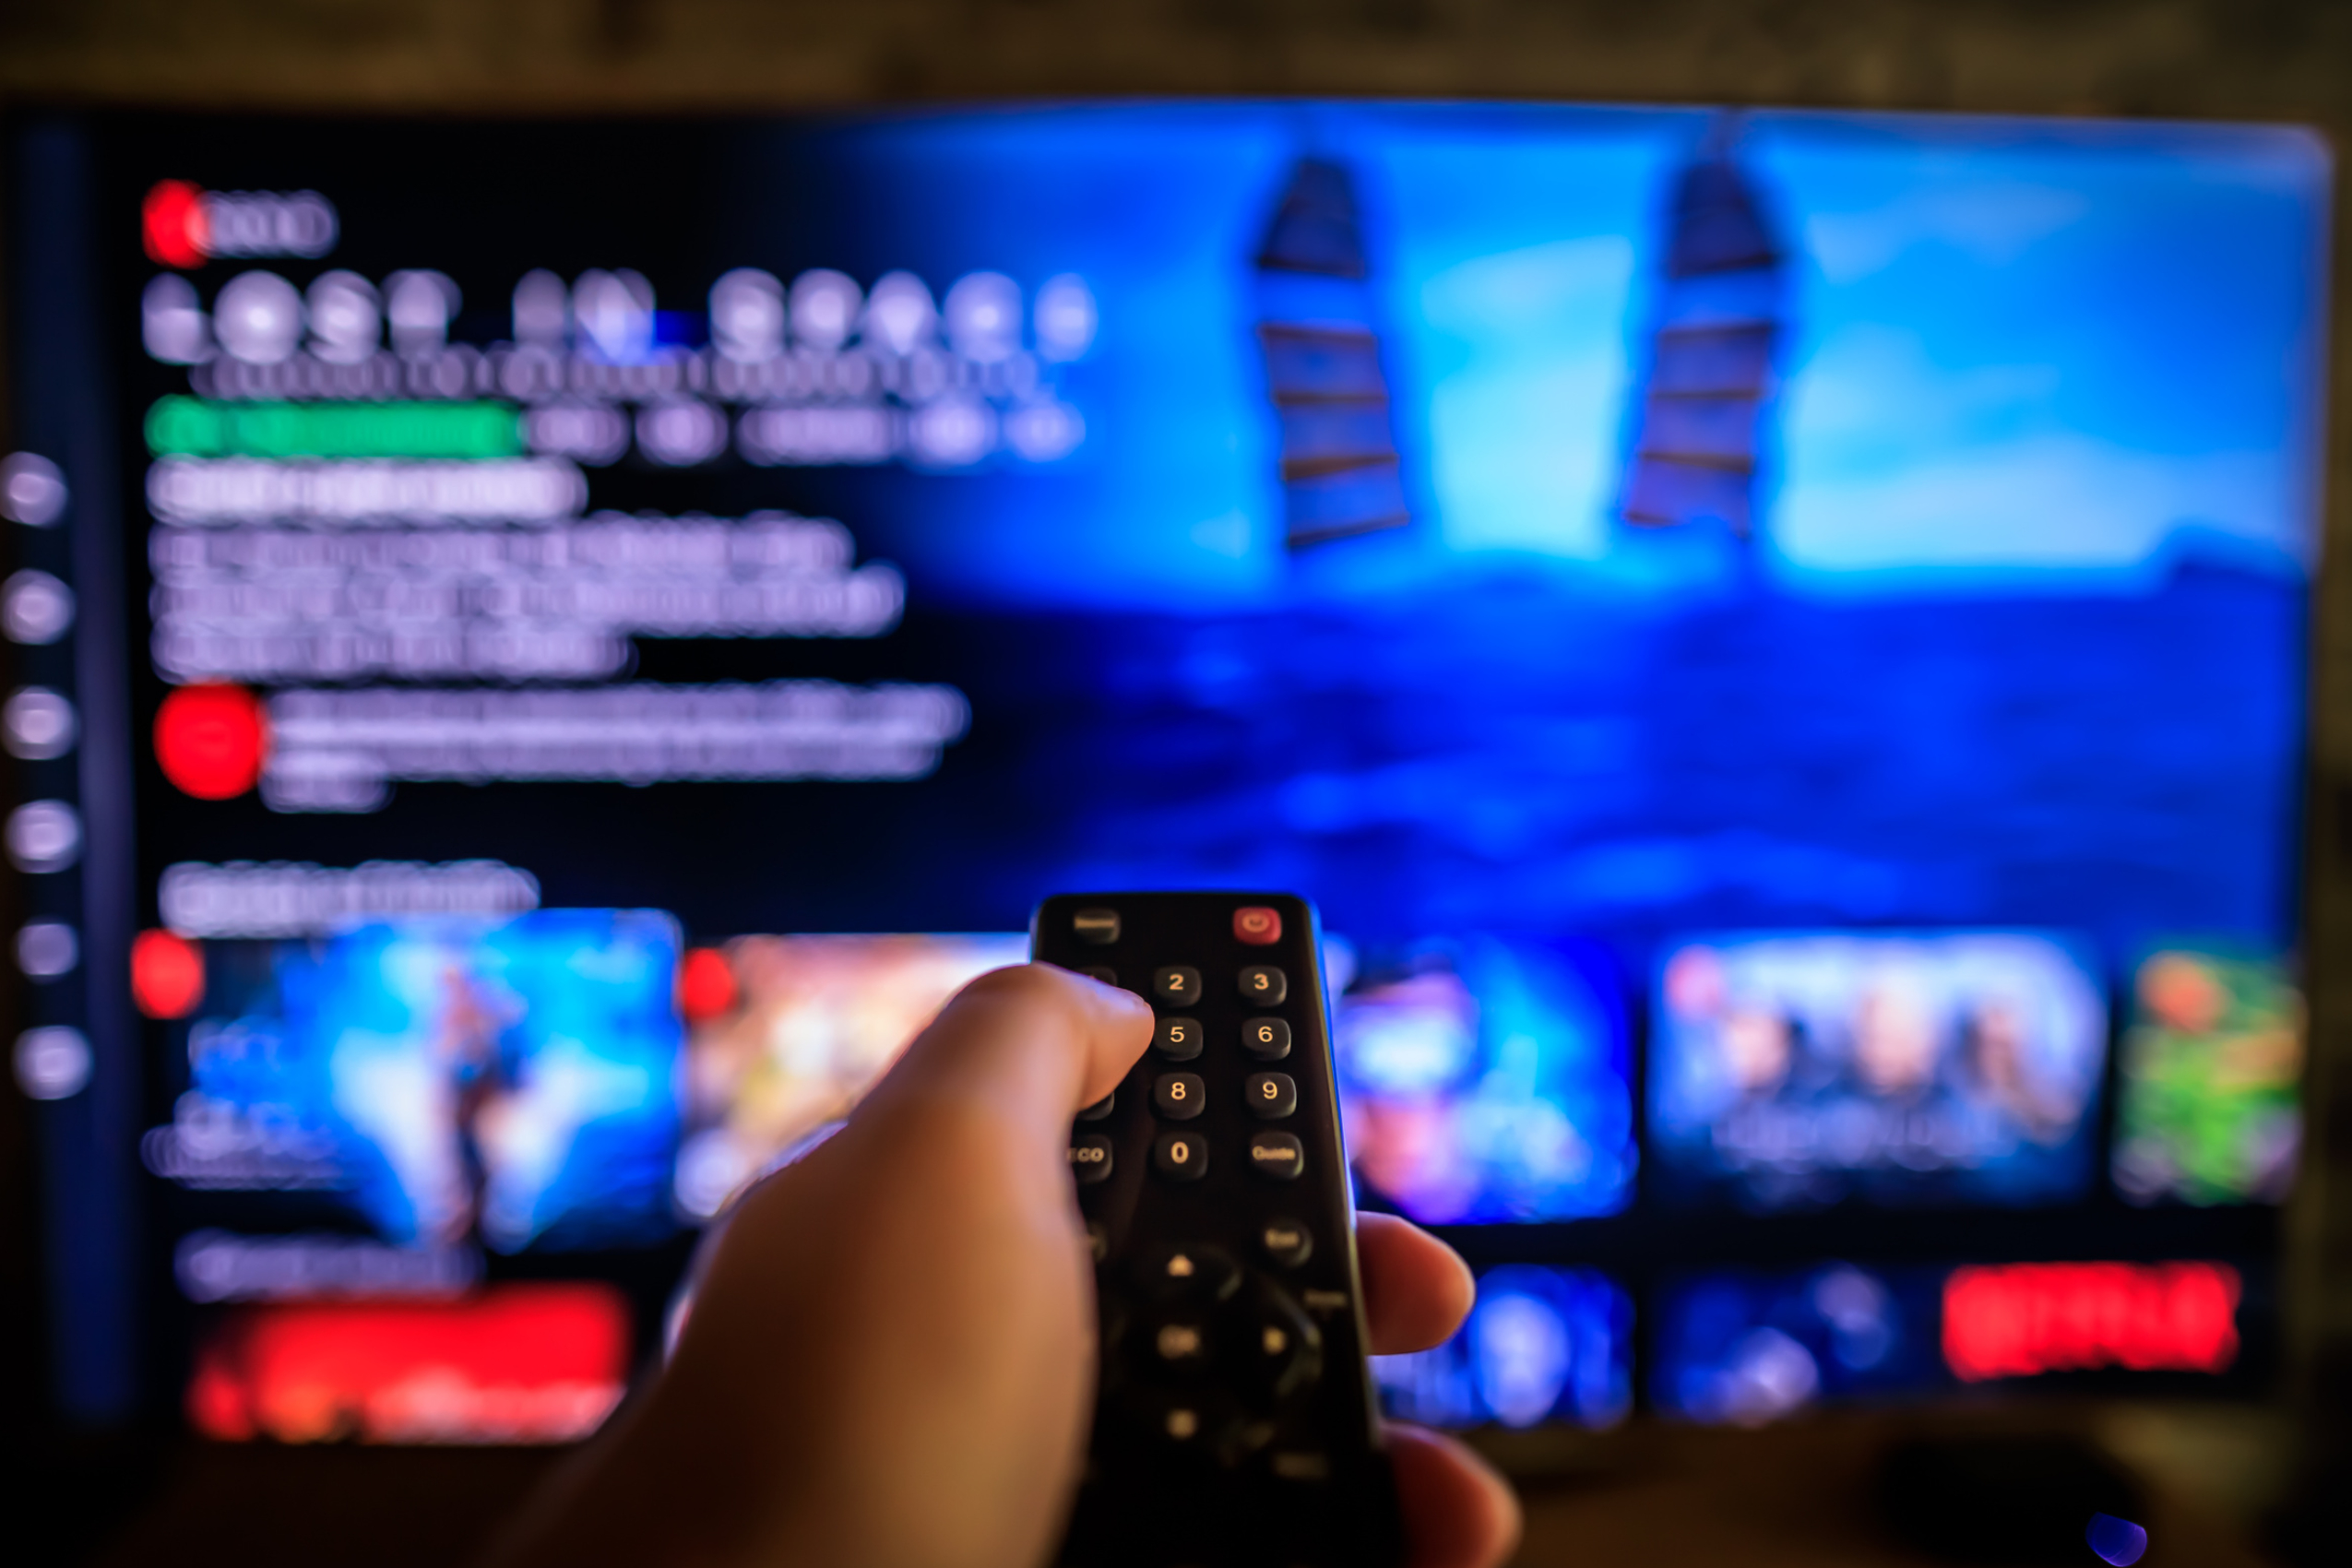 Using a connected tv or Smart TV to stream movies and shows.